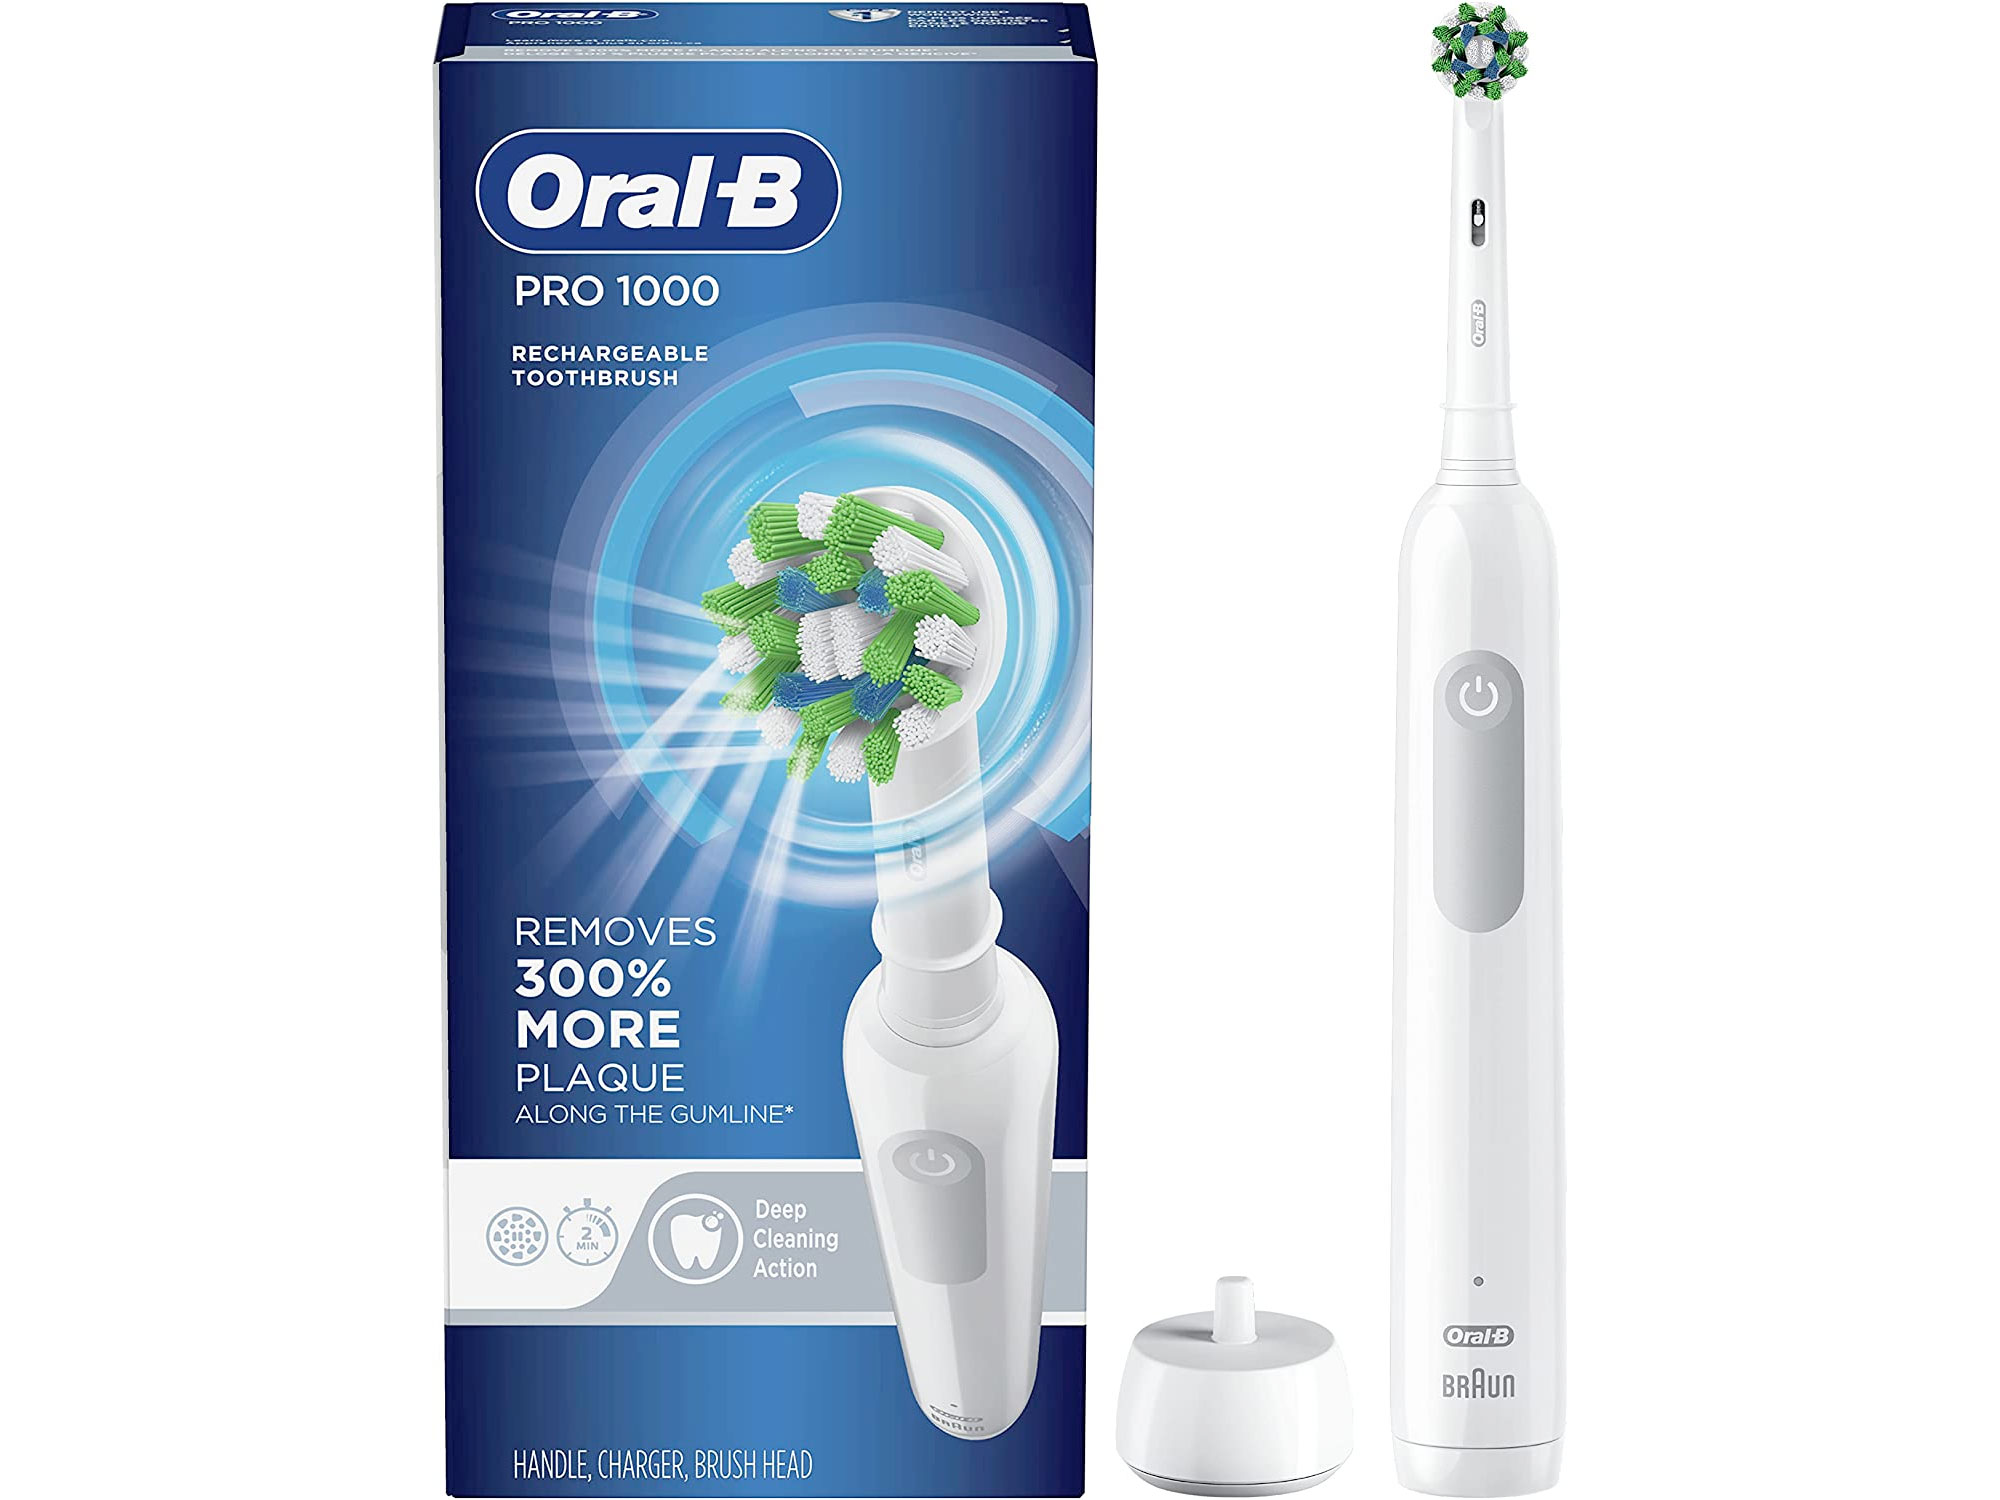 Amazon：Oral-B Pro 1000 Electric Toothbrush with Brush Head只賣$44.31